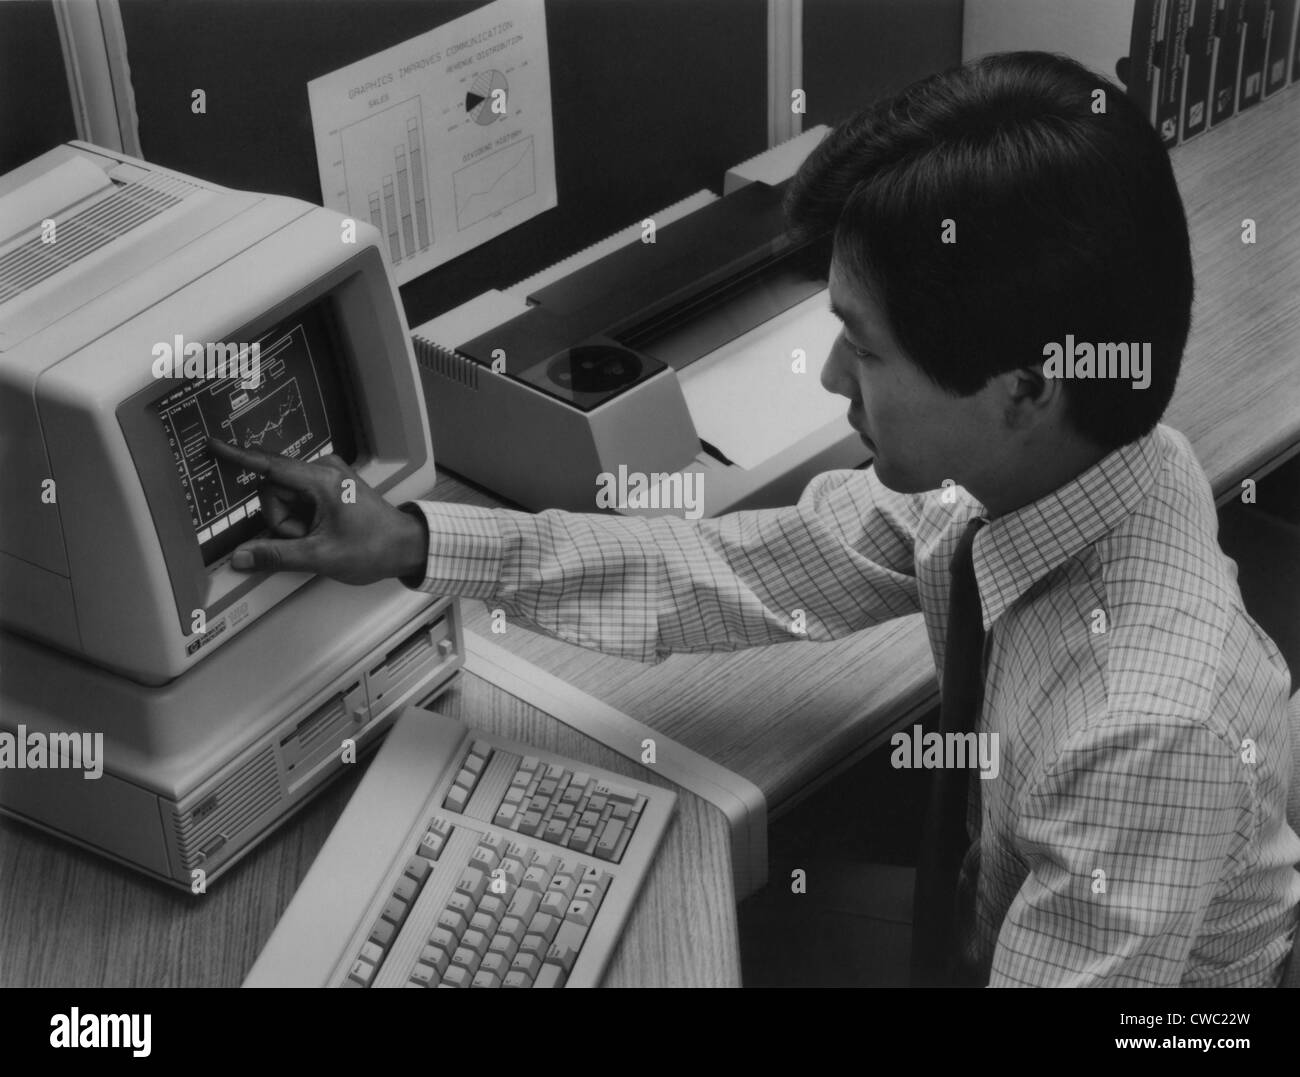 The 1983 Hewlett Packard-150 personal computer featured a touch-sensitive screen. It used a MS-DOS operating system an Intel Stock Photo